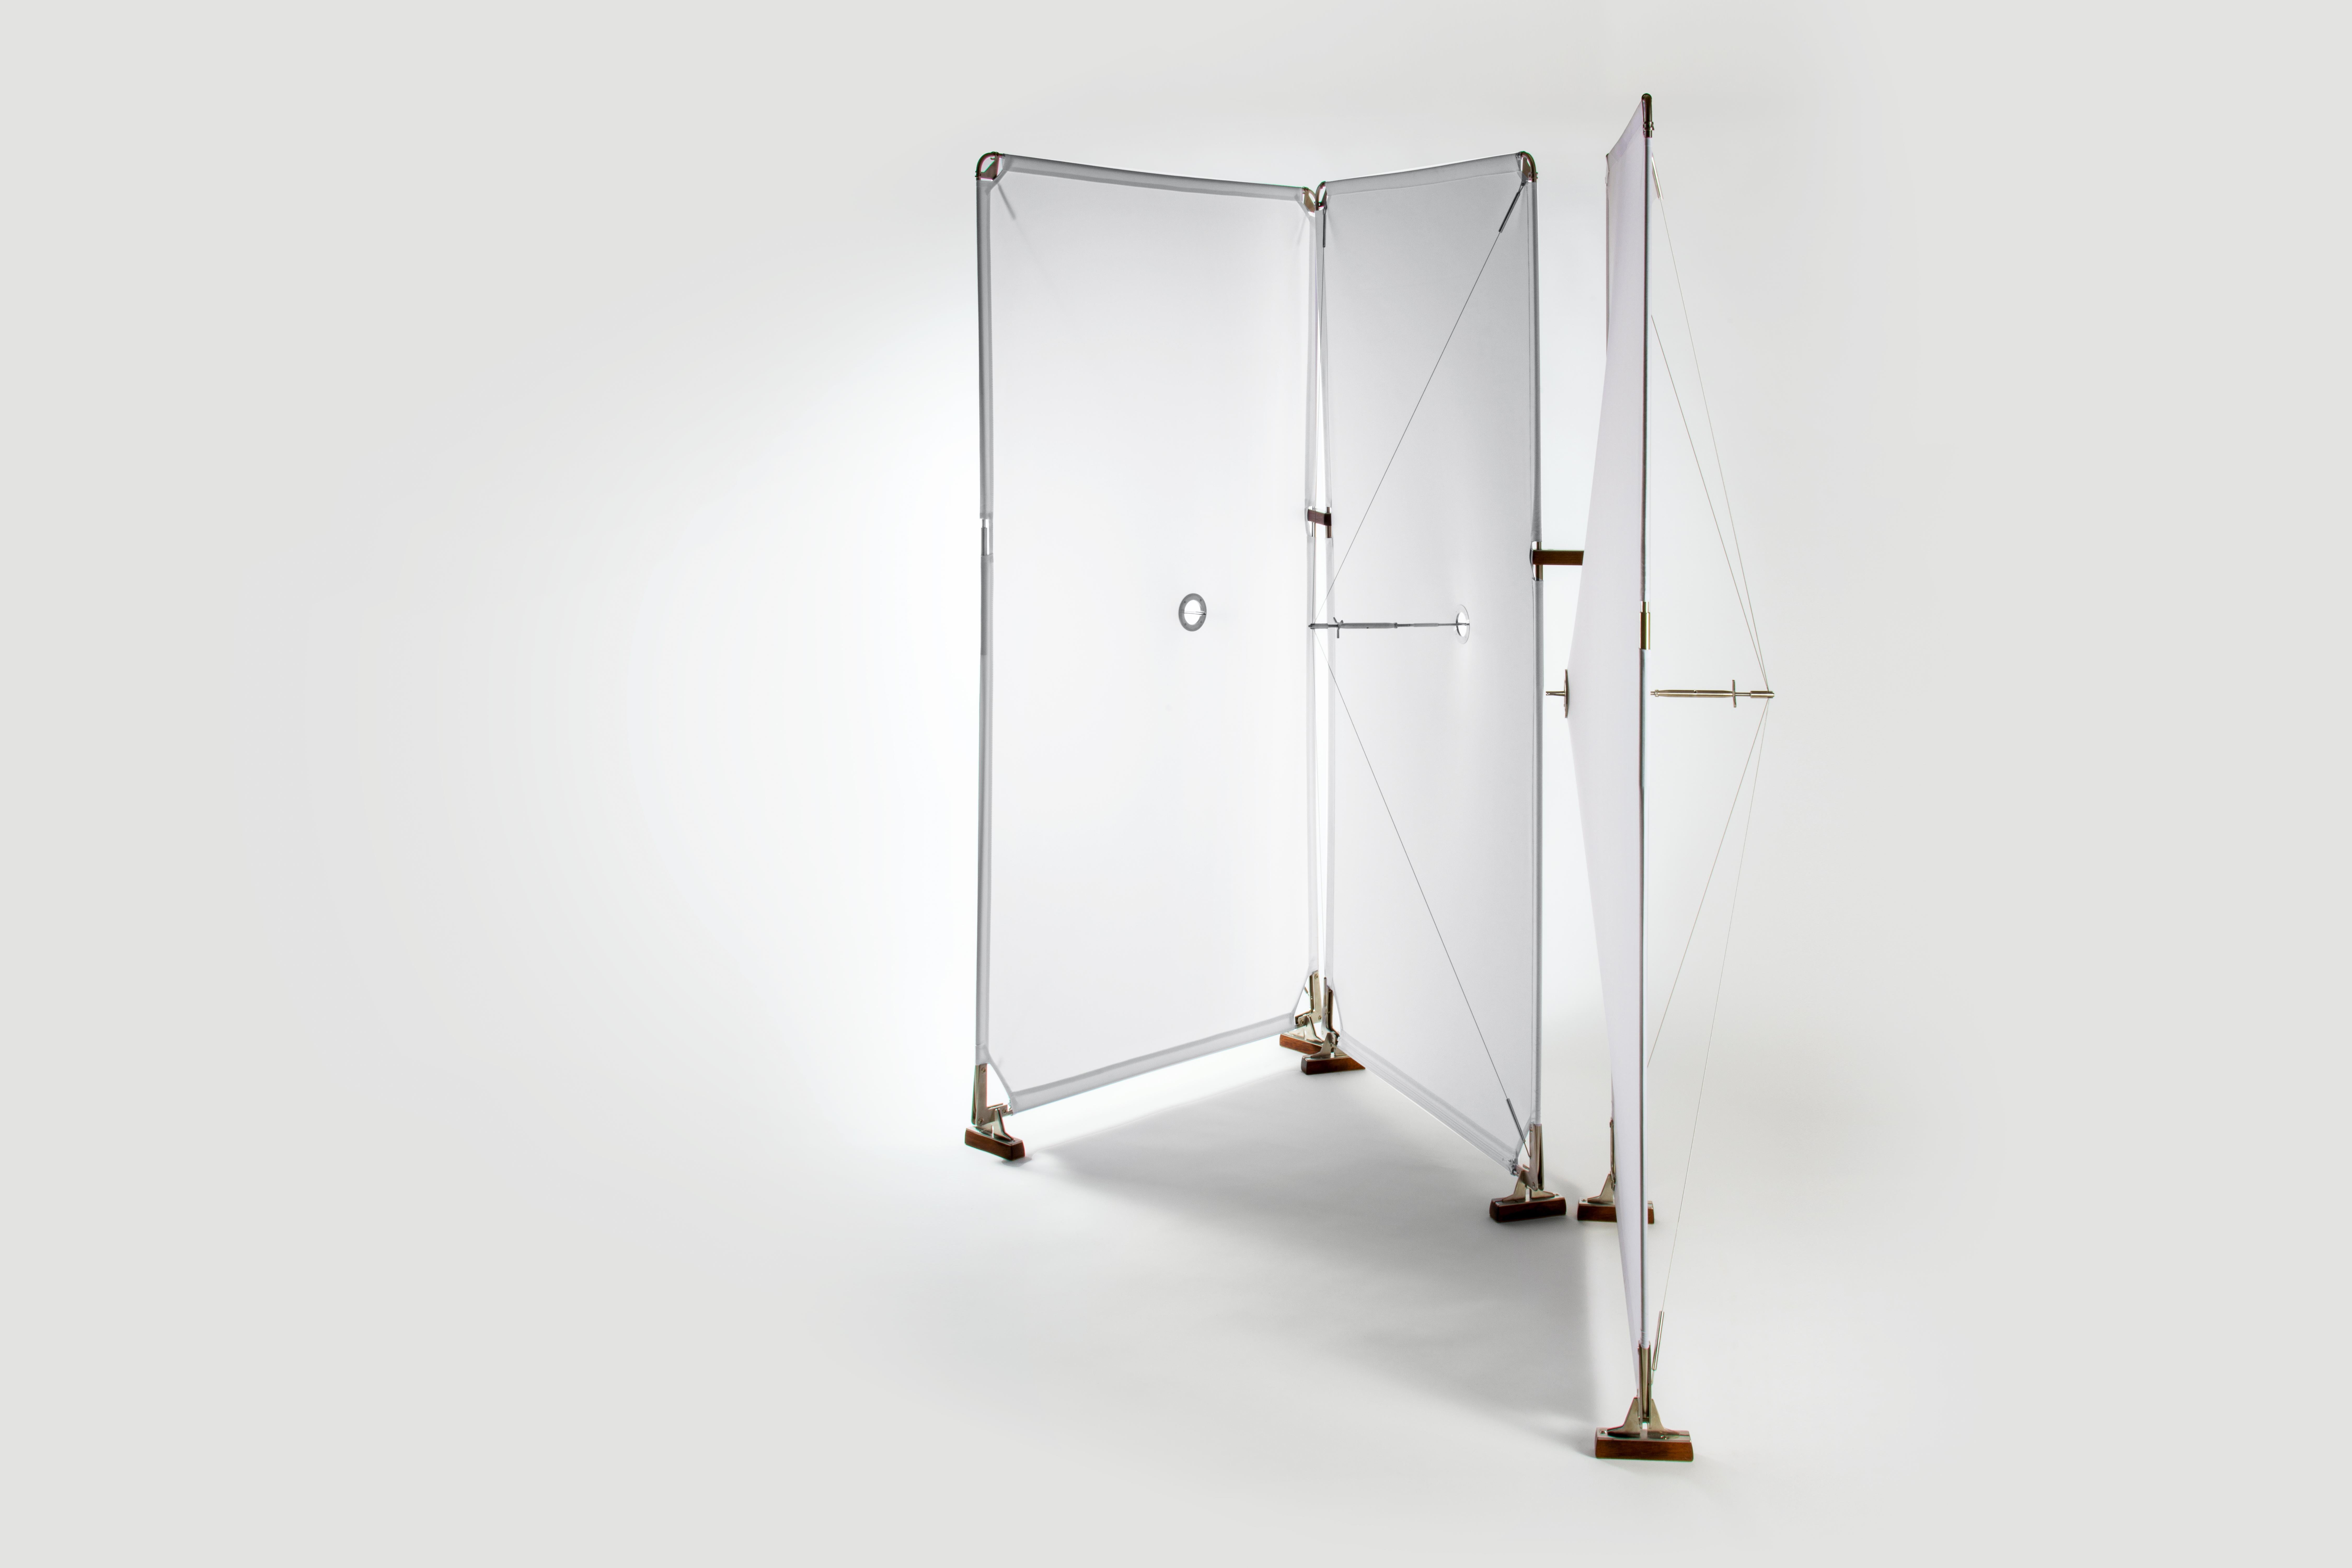 The Room divider is a fusion of lightweight materials and simple engineering. Its delicate frame, supported by a tension system reminiscent of the sleek lines of a yacht's sail, ensures stability with a subtle elegance.

A neat roman screw, subtly